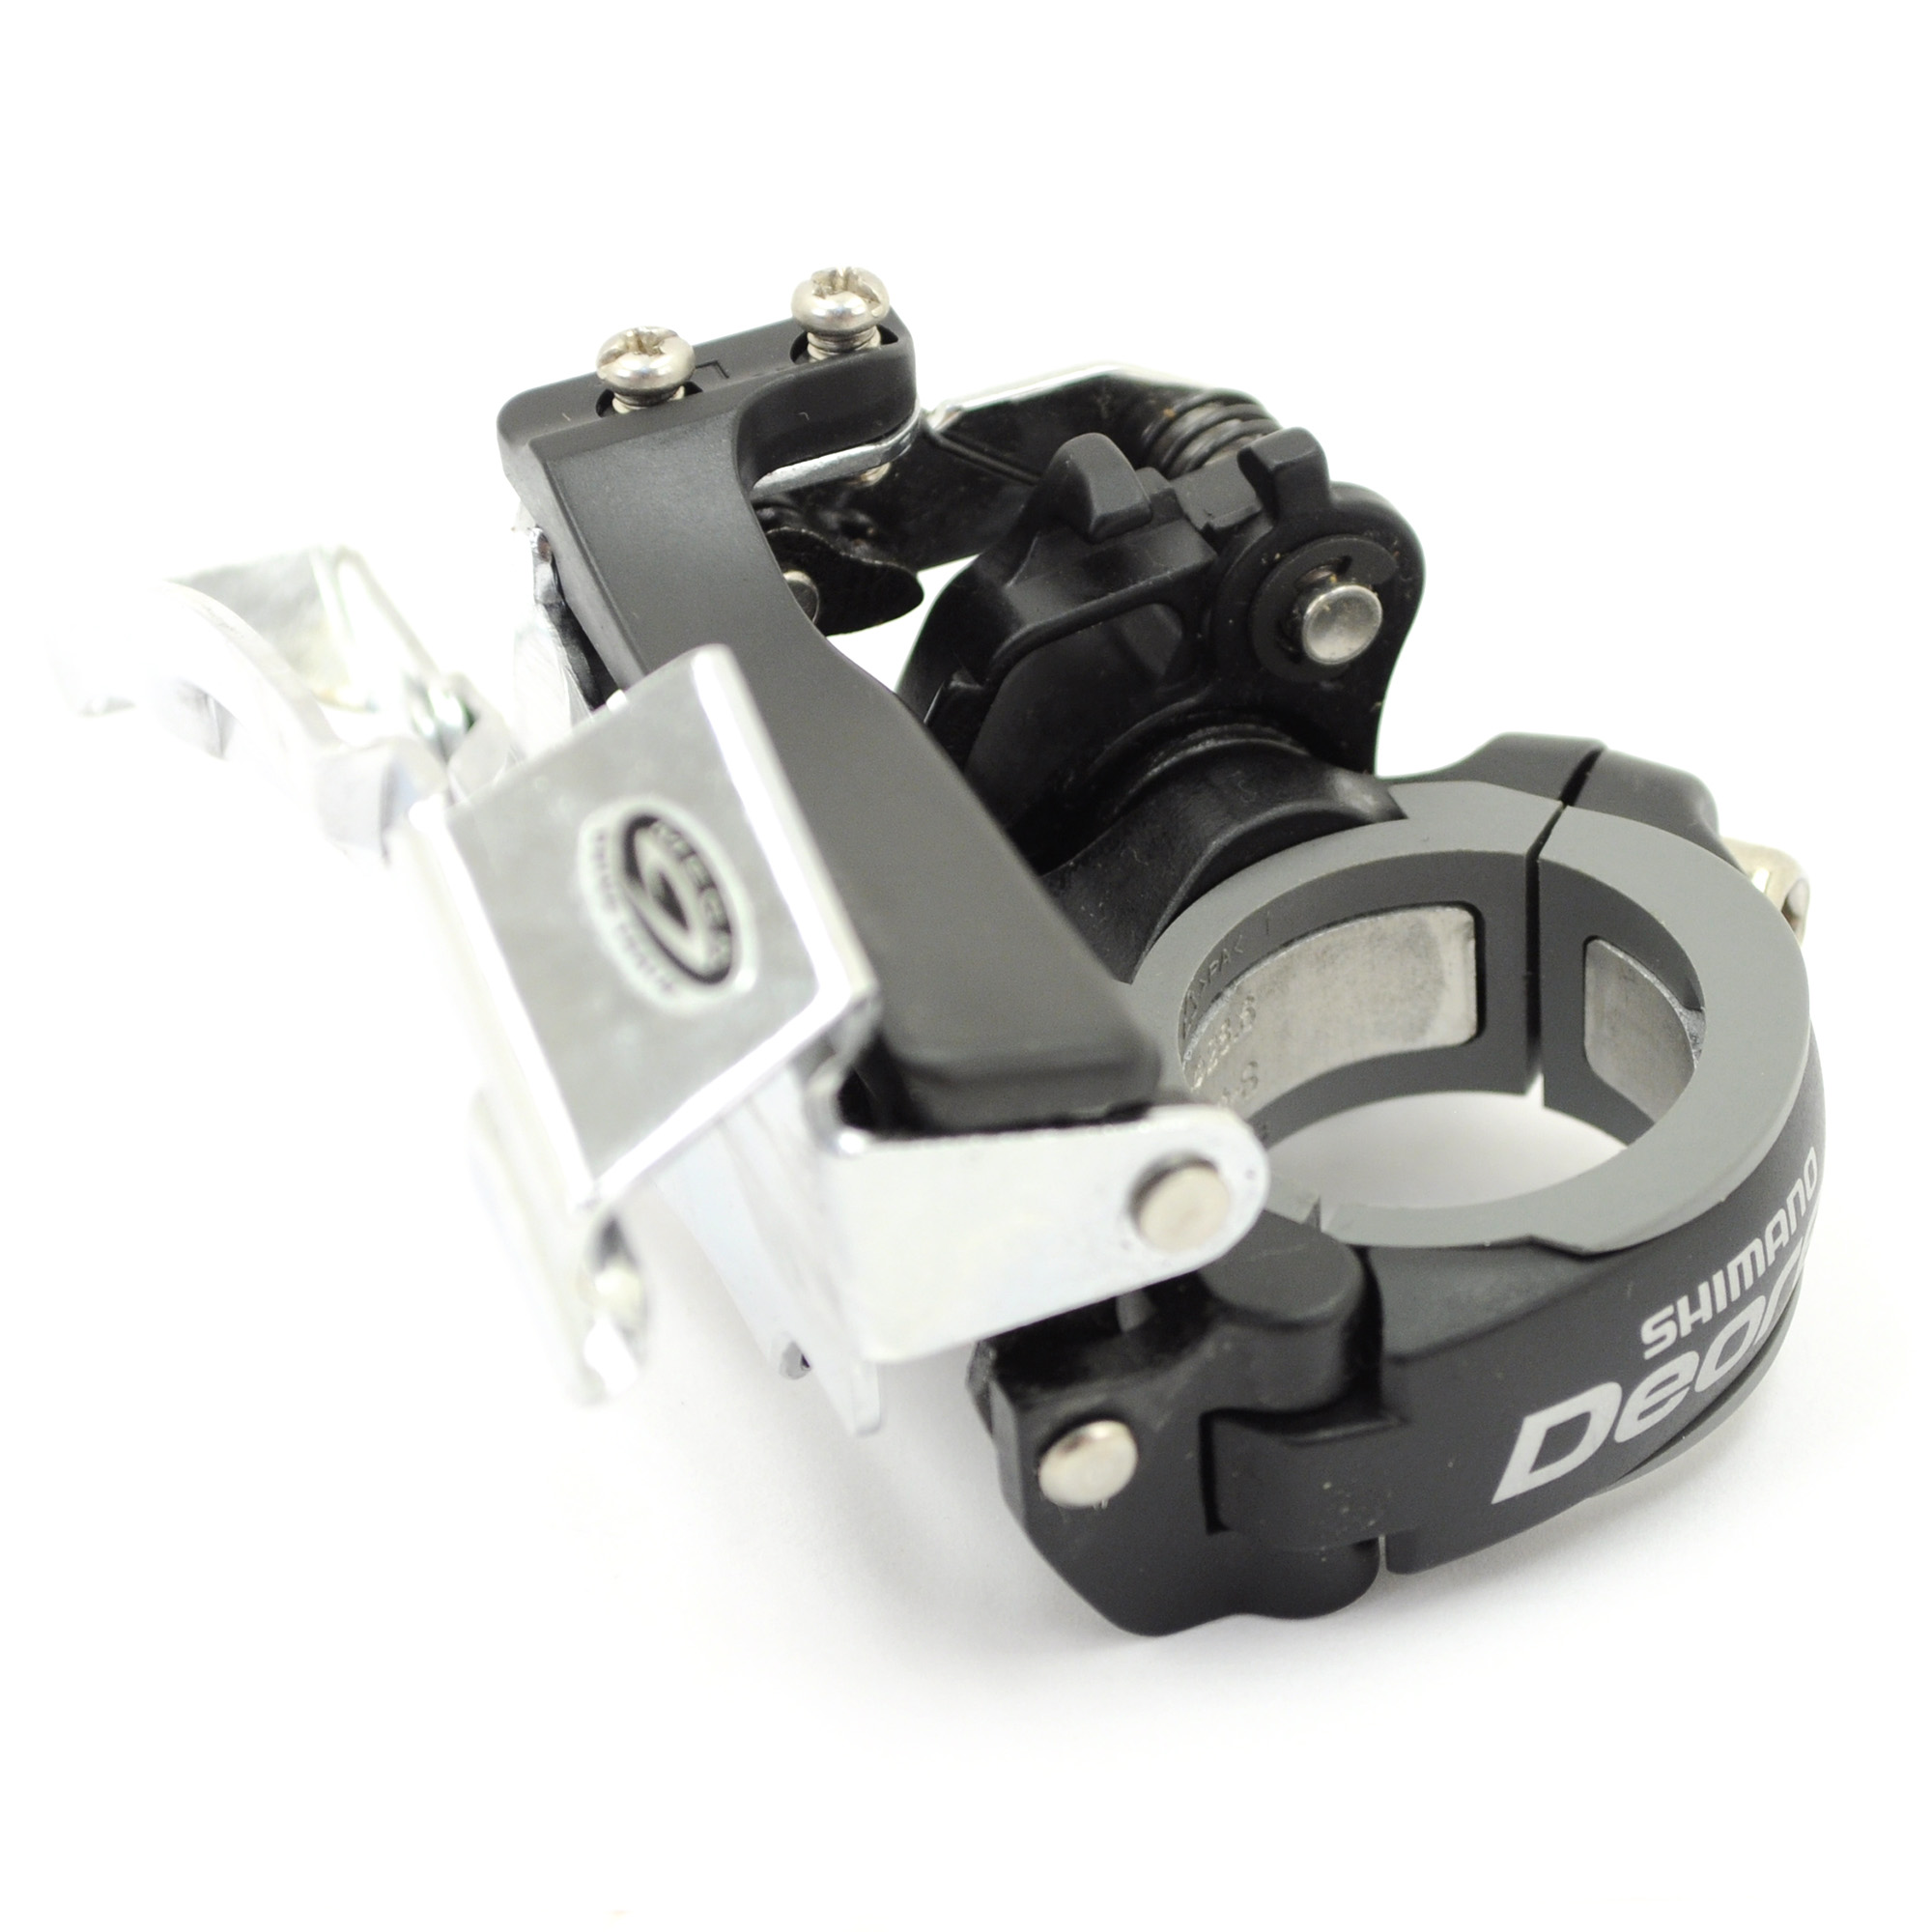 Shimano Deore FD-M530 Mountain Bike Front Derailleur // 3x9-Speed // 34.9mm - image 2 of 3